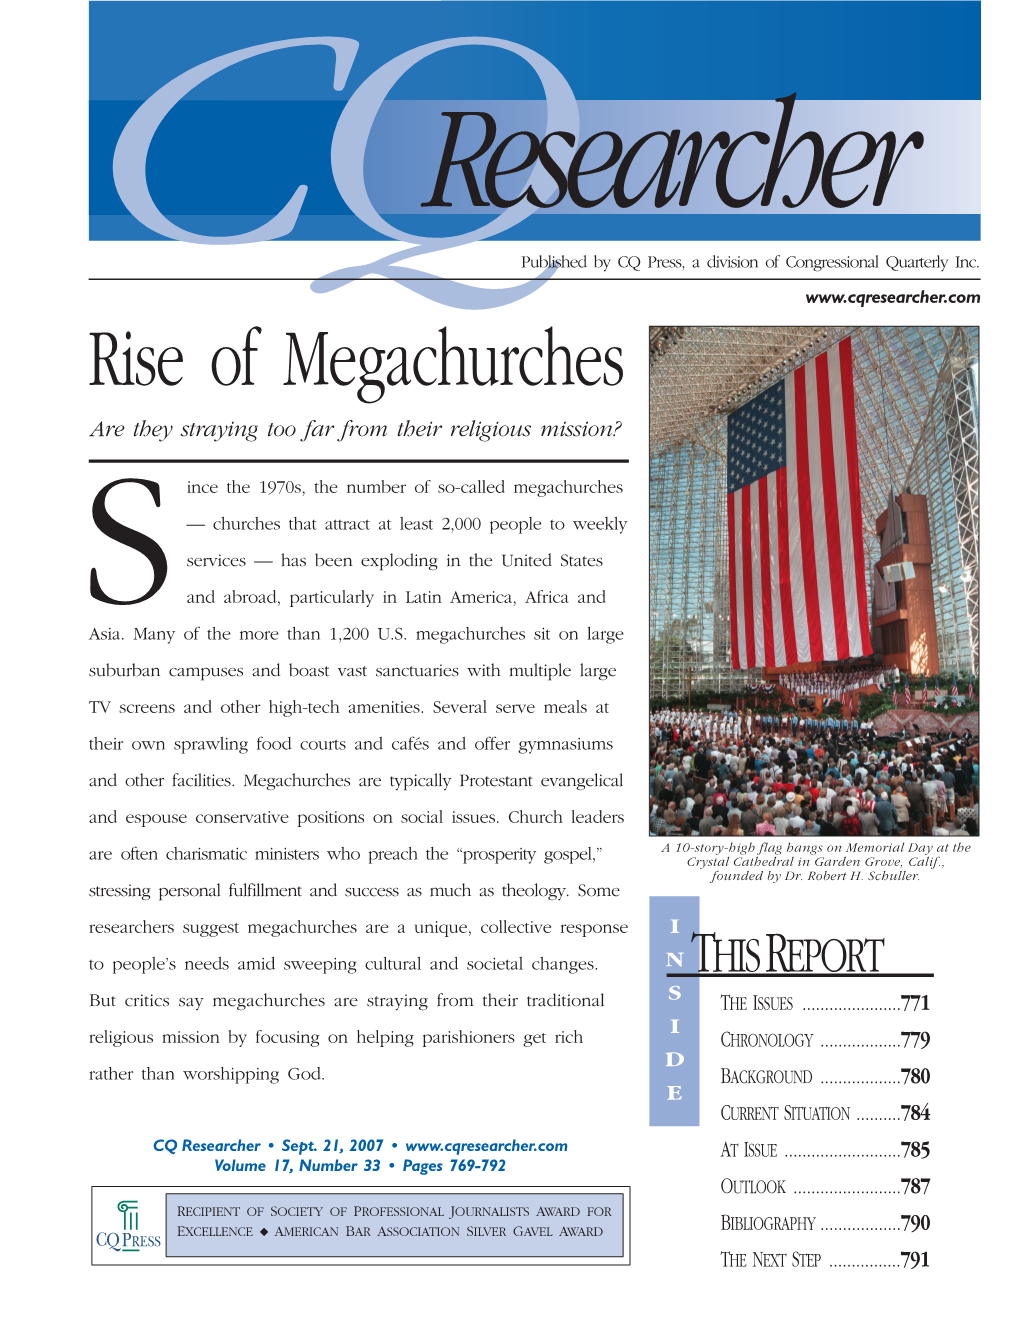 Rise of Megachurches Are They Straying Too Far from Their Religious Mission?